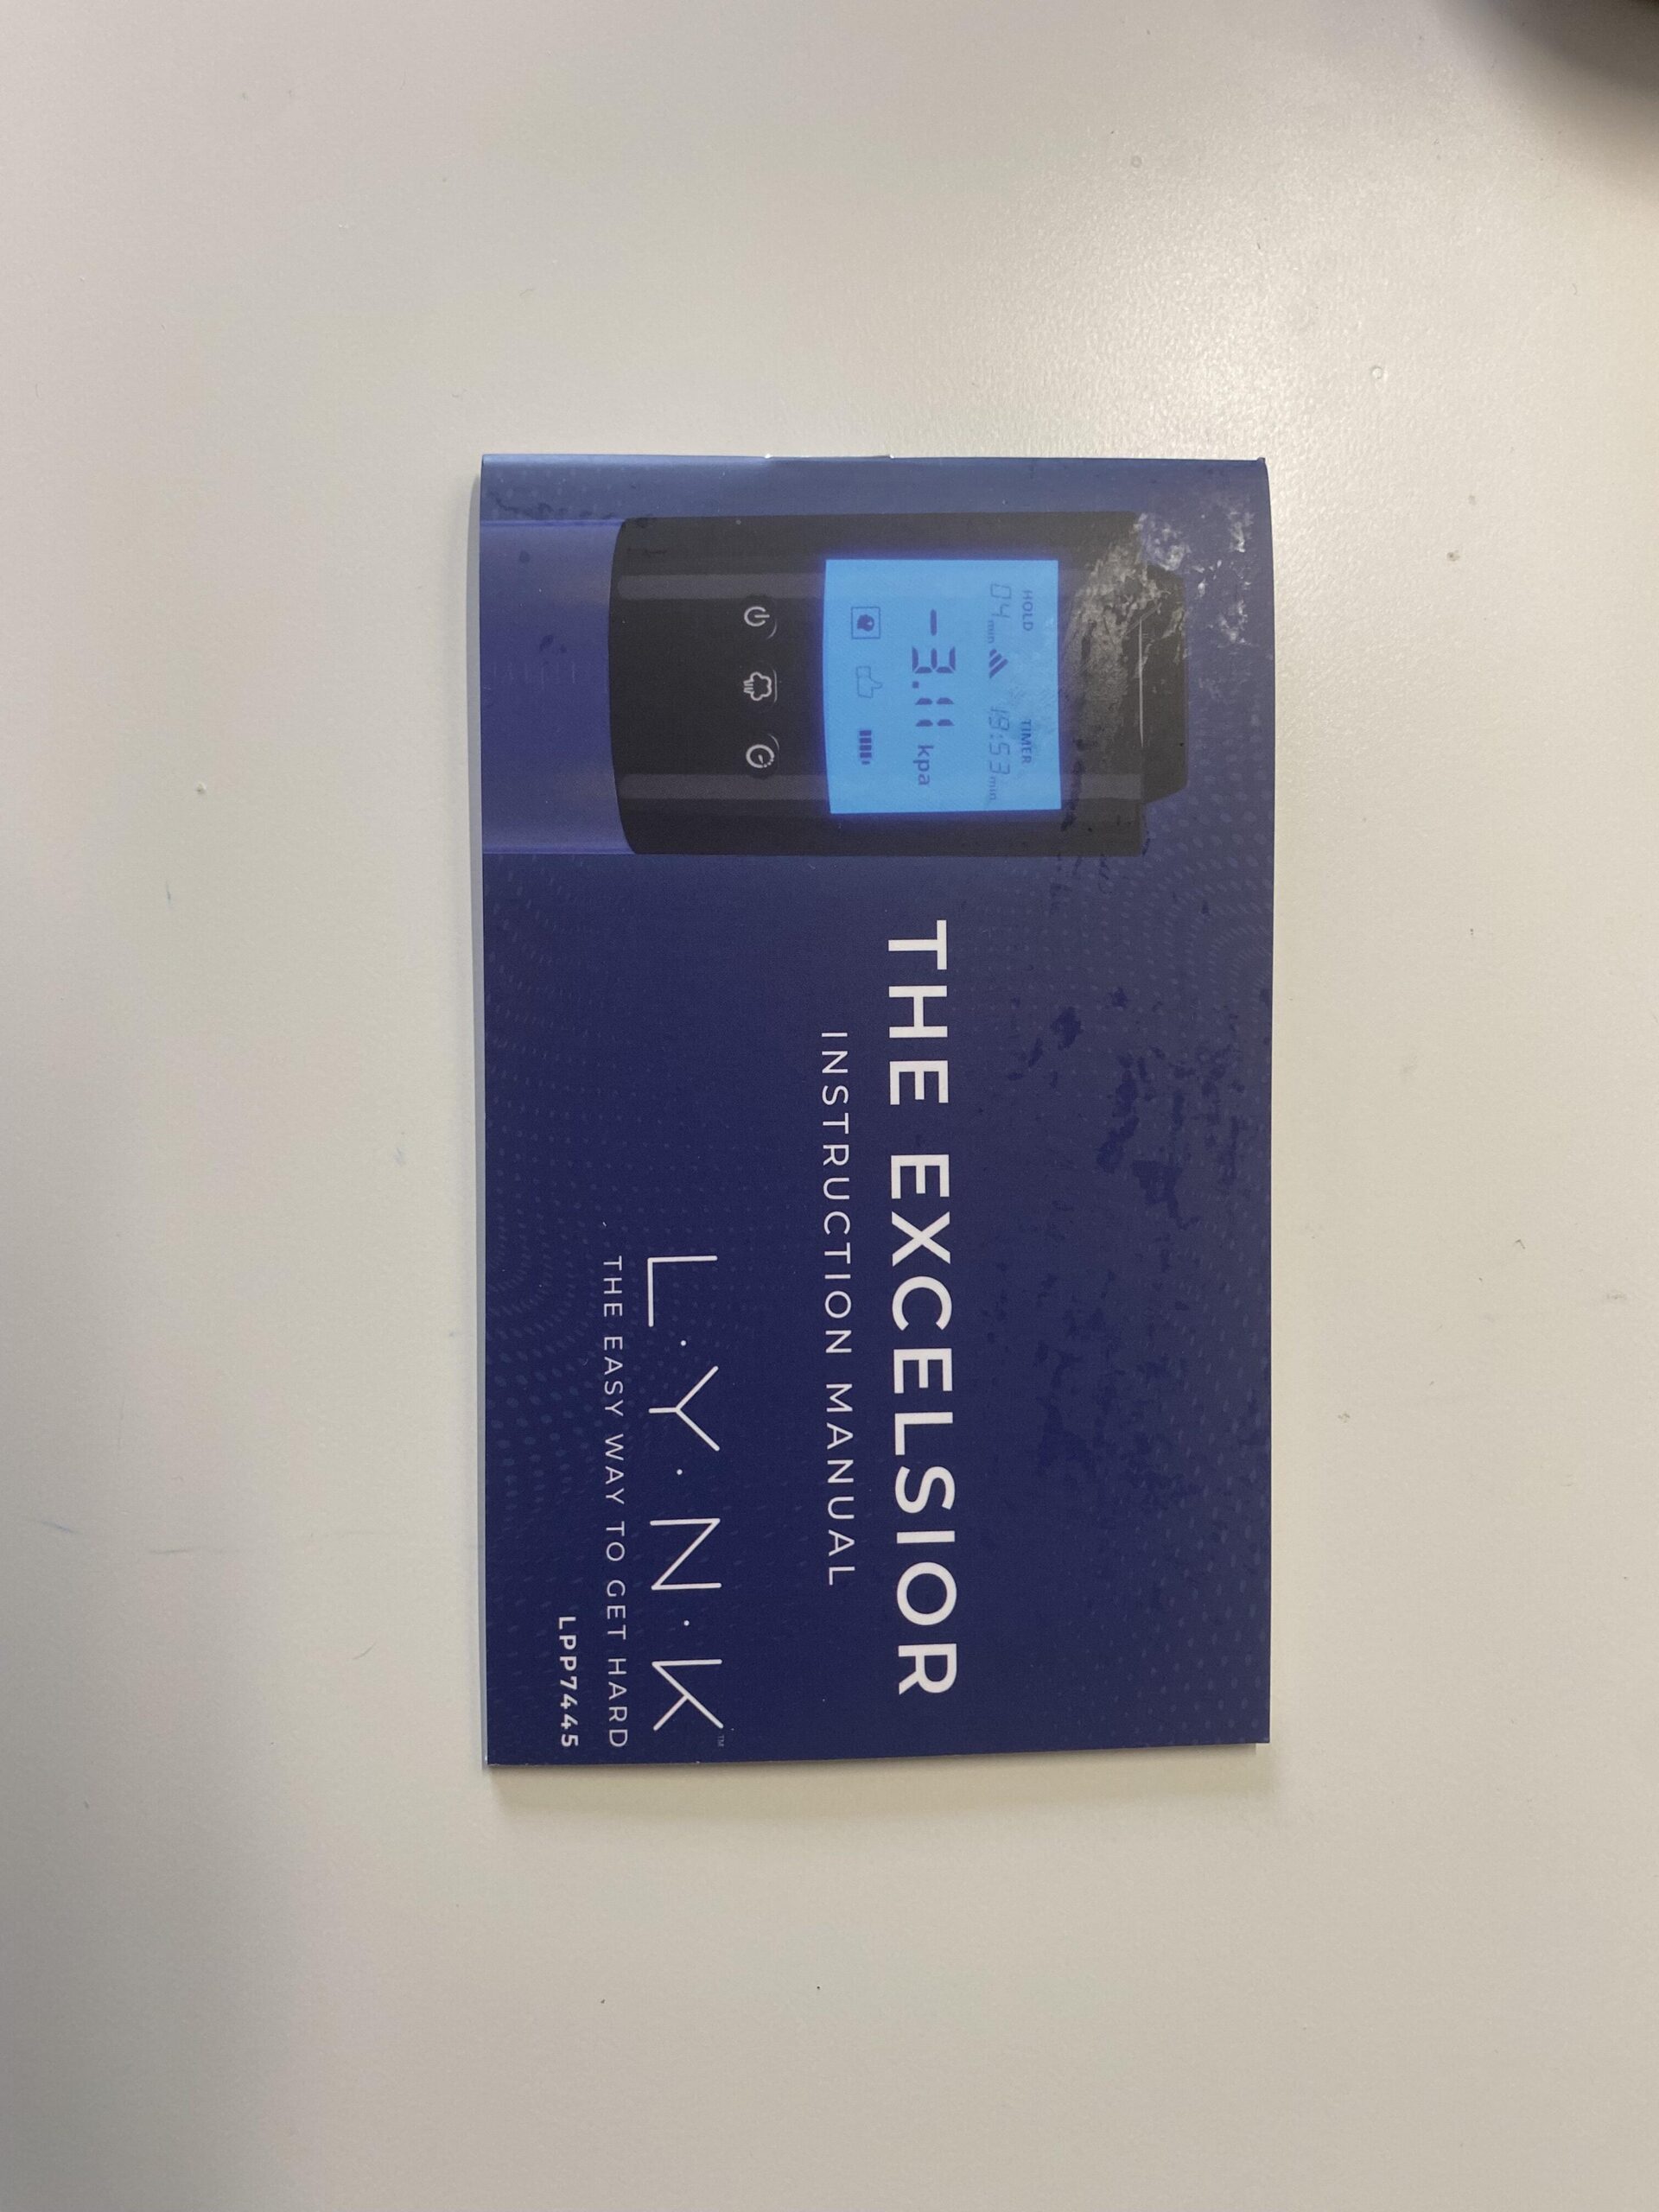 The Excelsior Smart Automatic Penis Pump Analyzing the Packaging: First Impressions